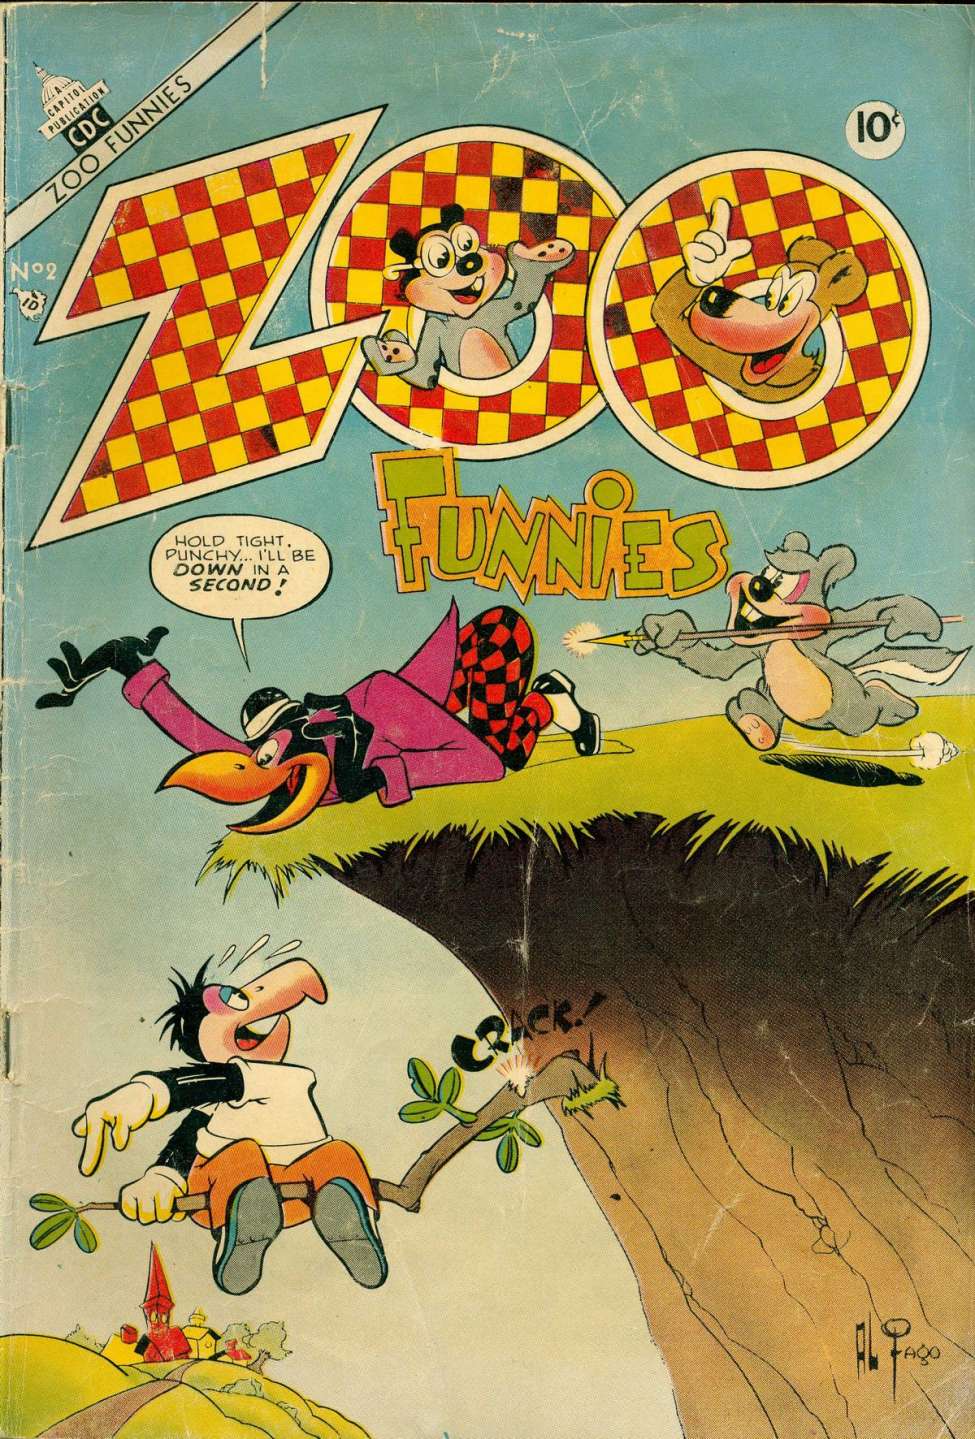 Book Cover For Zoo Funnies v2 2